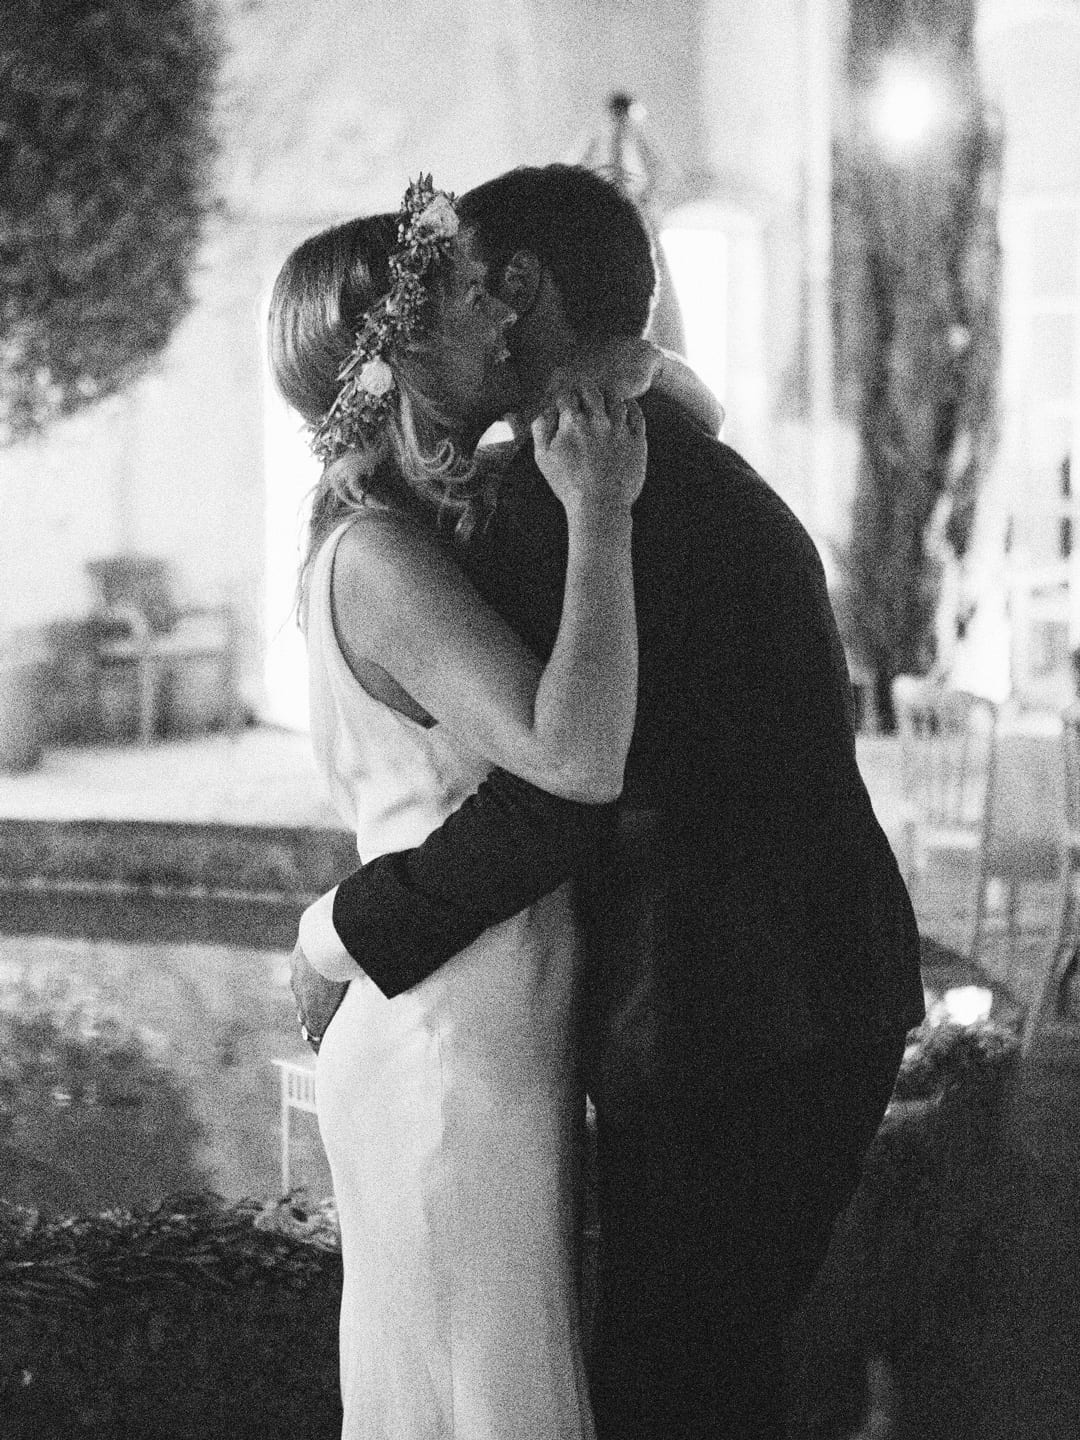 Our first dance in the courtyard at night